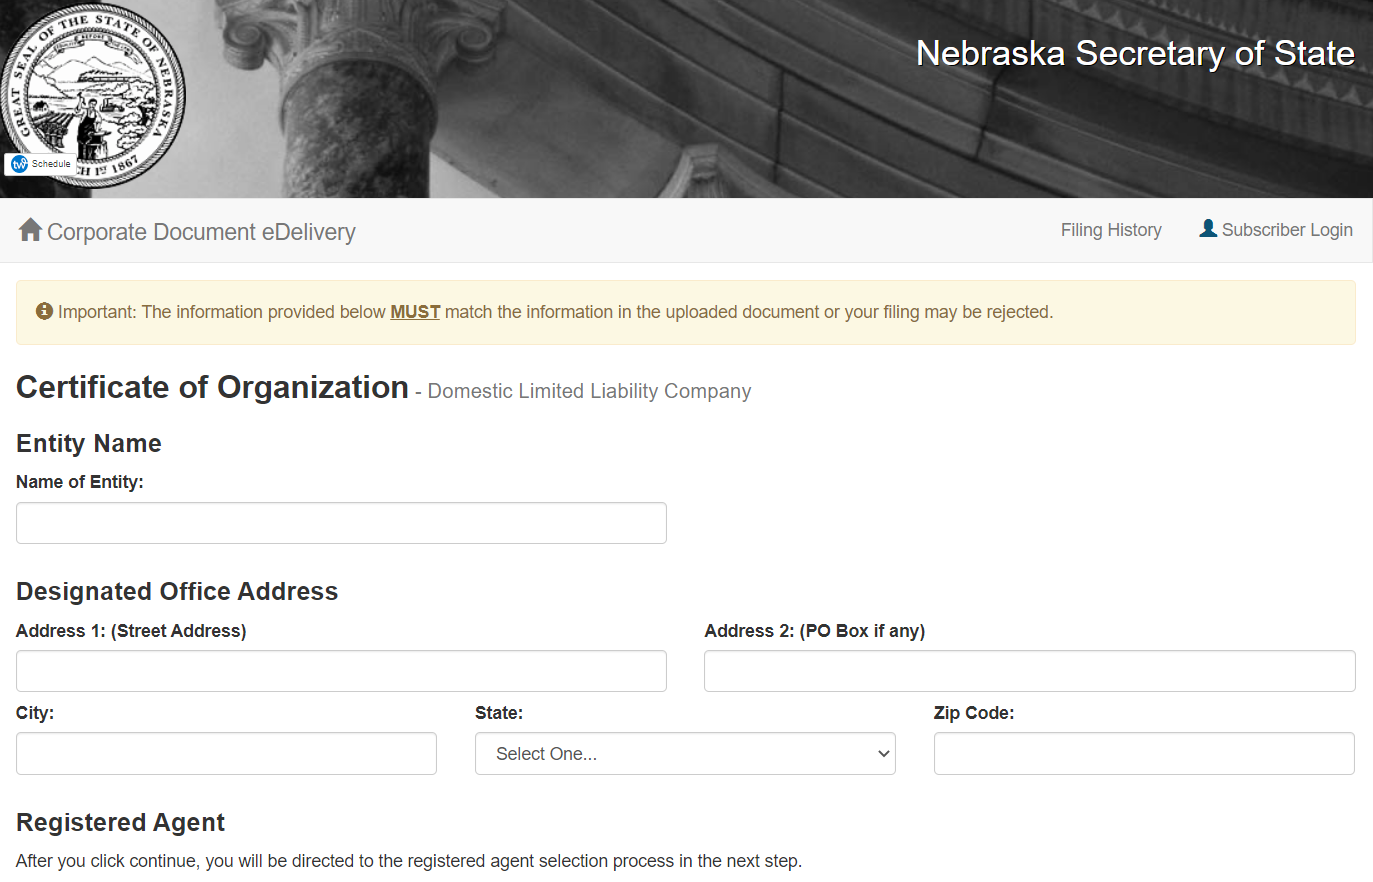 How to File a Certificate of Organization in Nebraska Step By Step